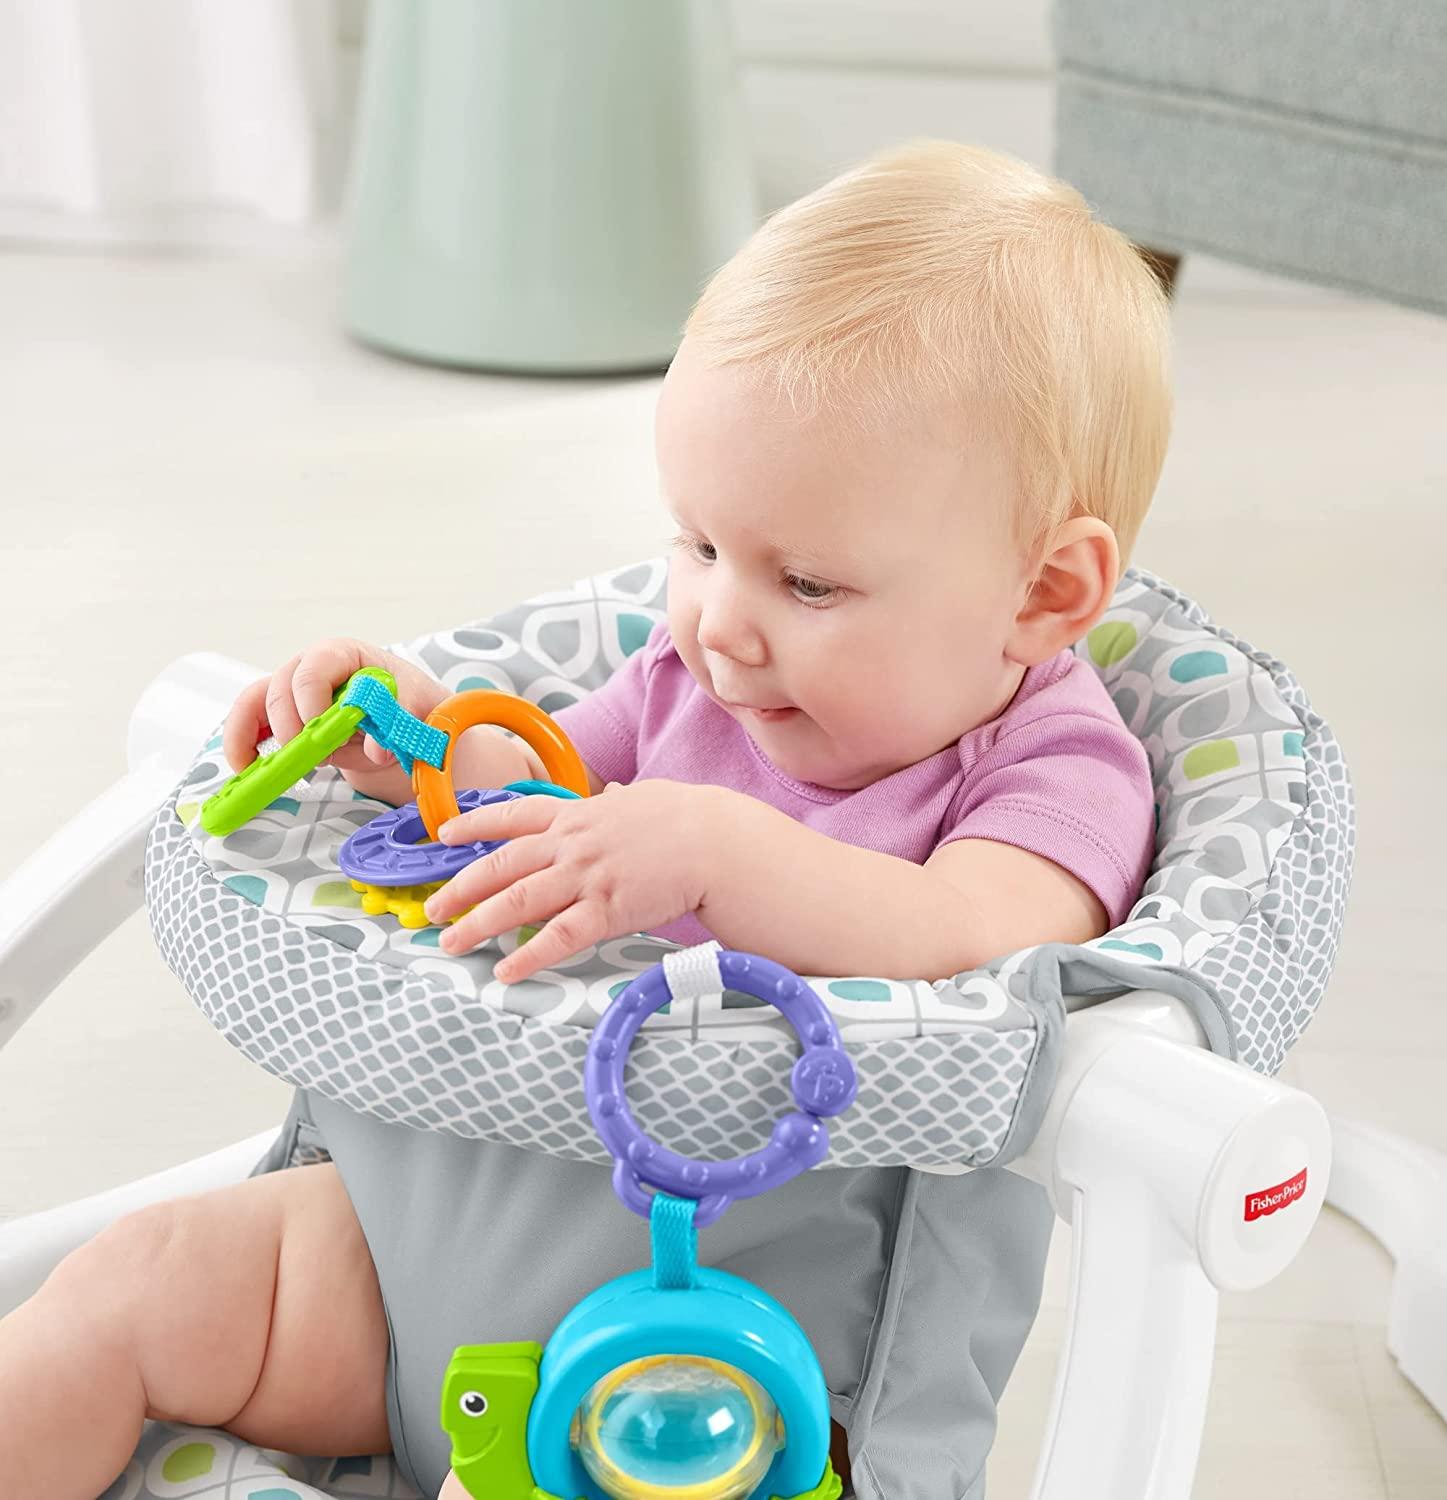 Baby Seat & Play Chair